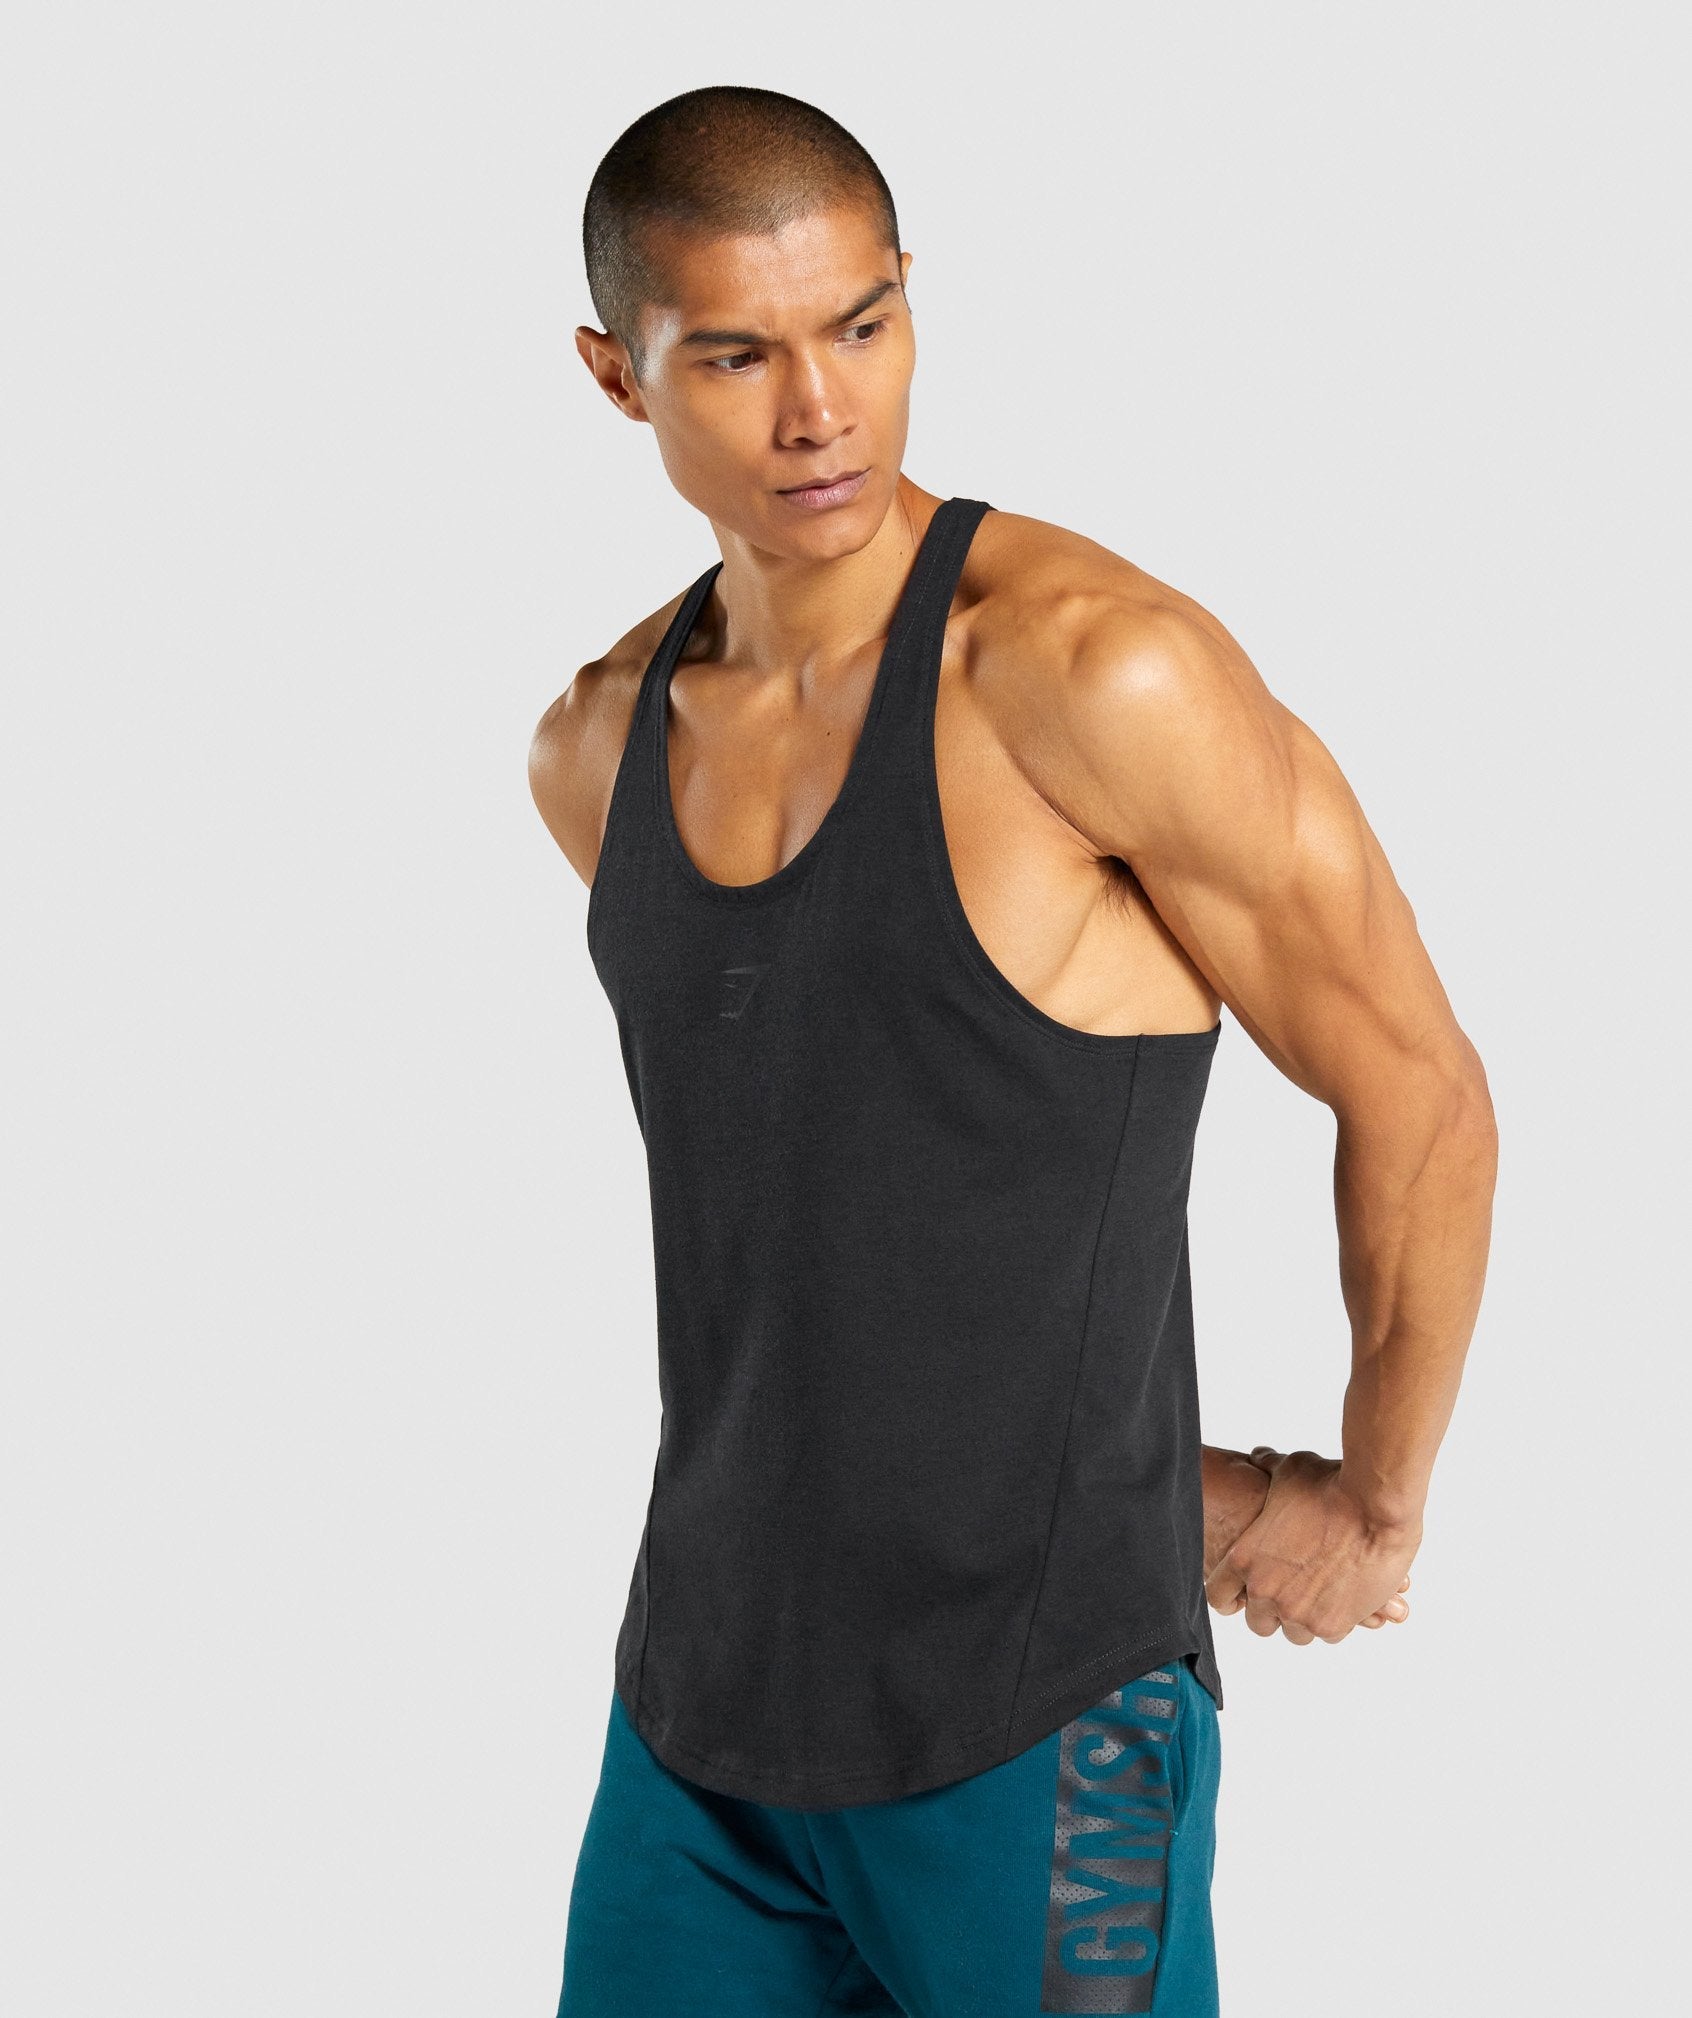 Sizing help for Bold Stinger Gymshark, 5'10, 181lbs 43-45 chest (not  sure) ?? : r/Gymshark